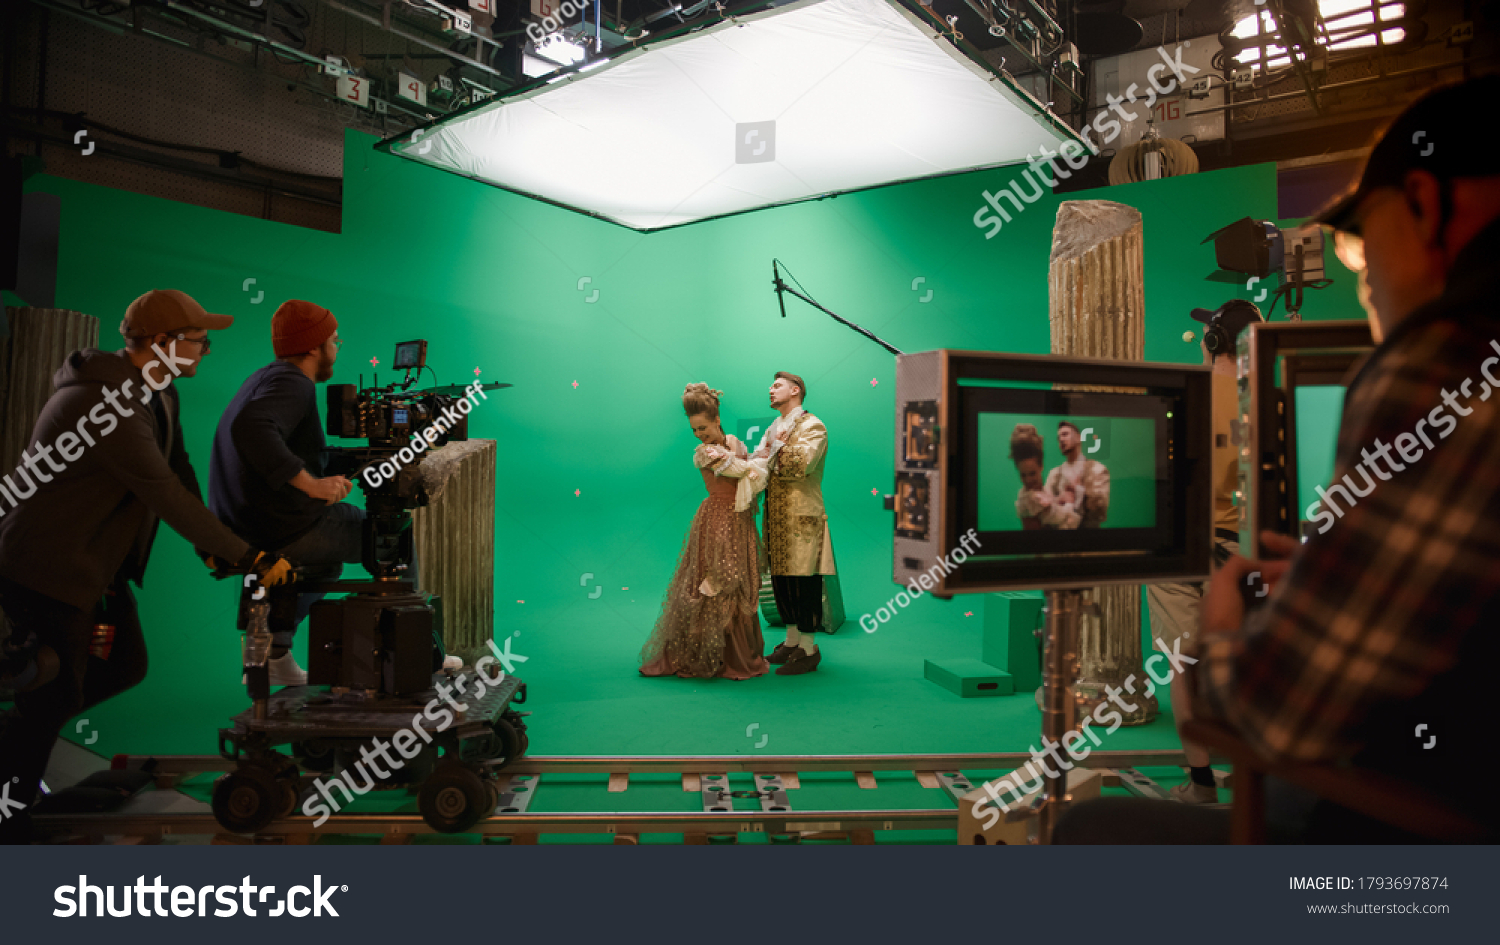 On Big Film Studio Professional Crew Shooting Period Costume Drama Movie. On Set: Director Controls Cameraman Shooting Green Screen Scene with Two Actors Talented Wearing Renaissance Clothes Talking #1793697874